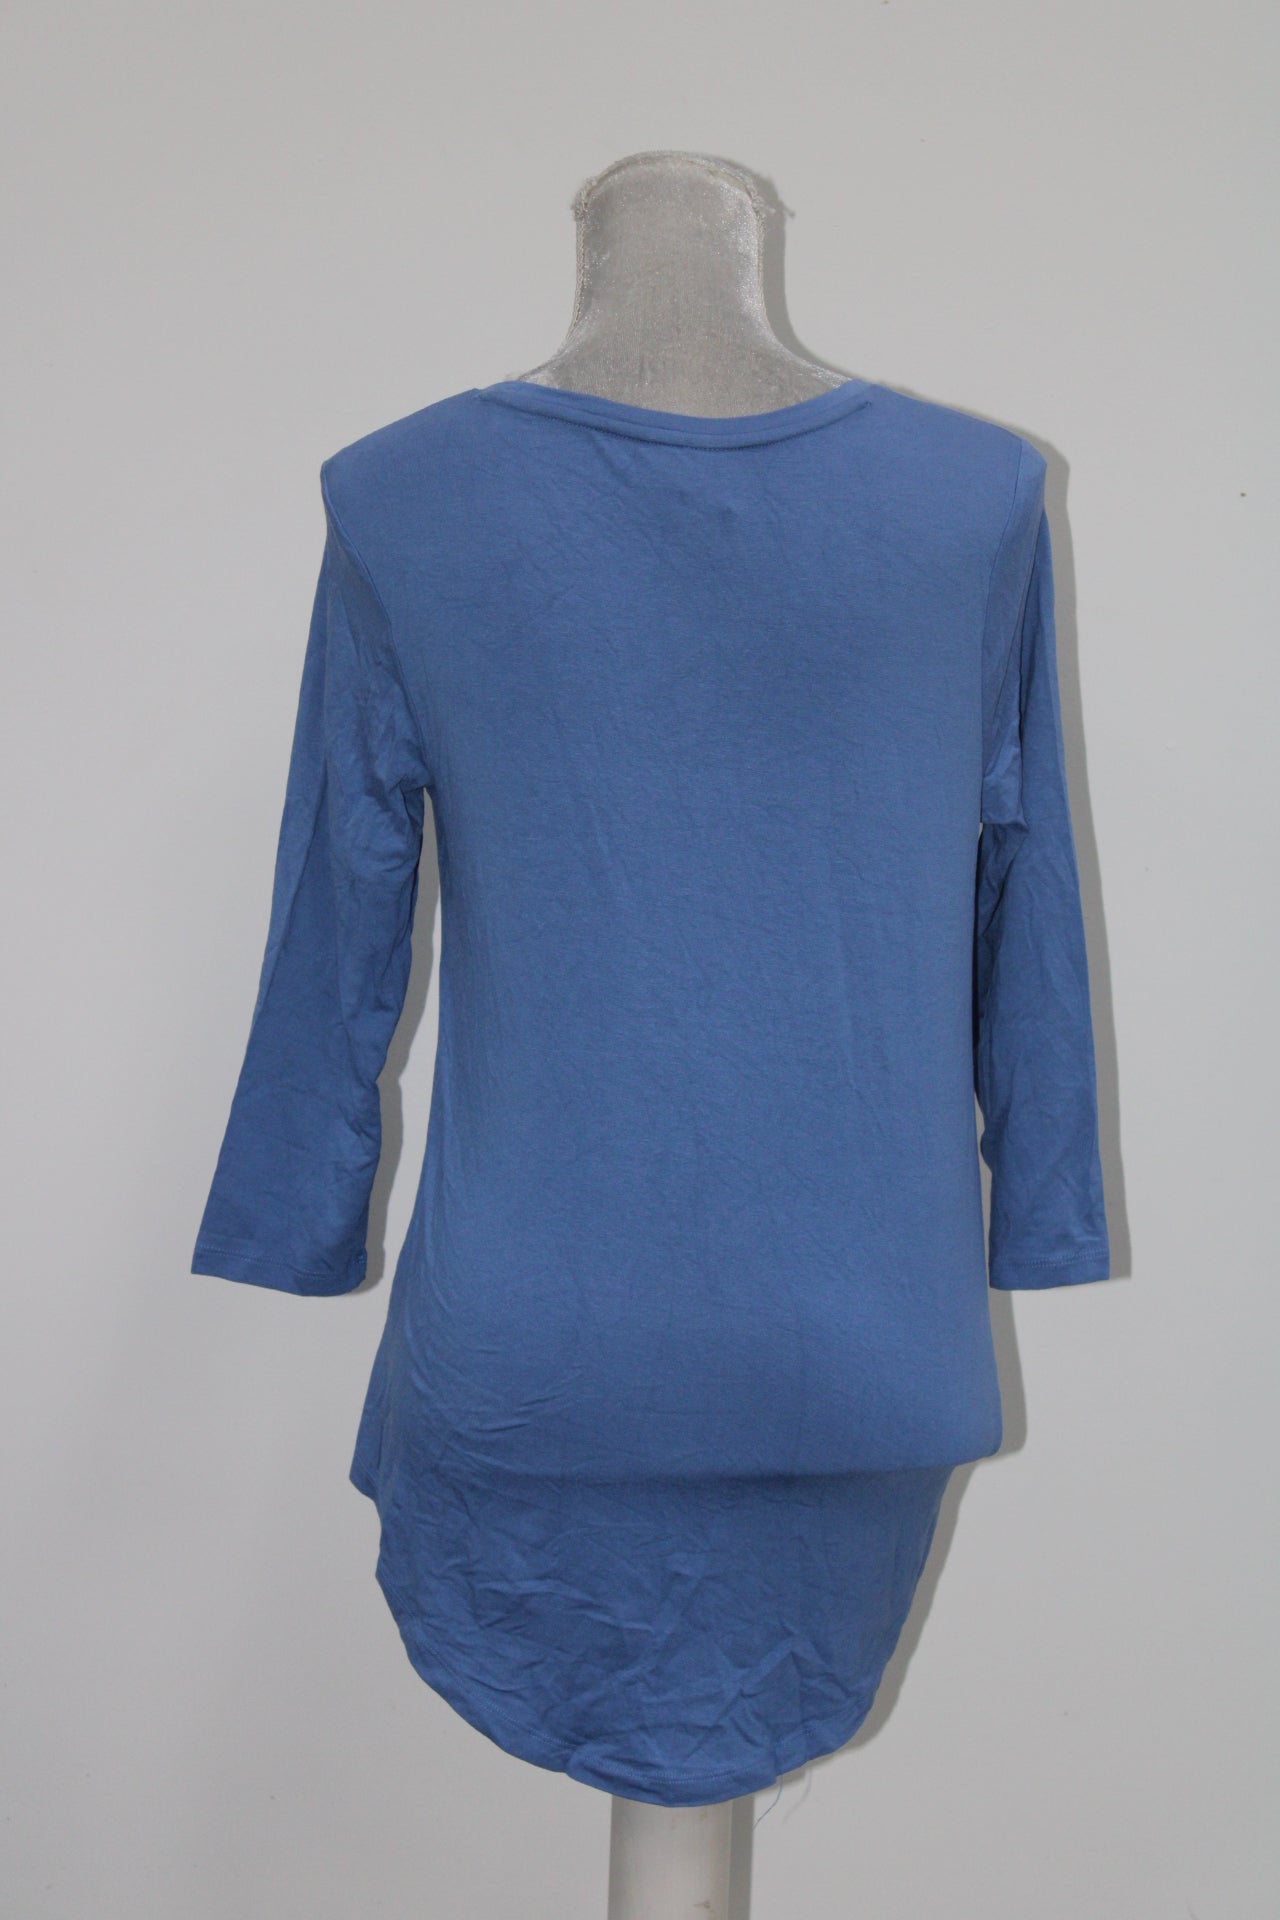 JM Collection 3/4 Sleeve Solid Rayon Span Top Blue XS